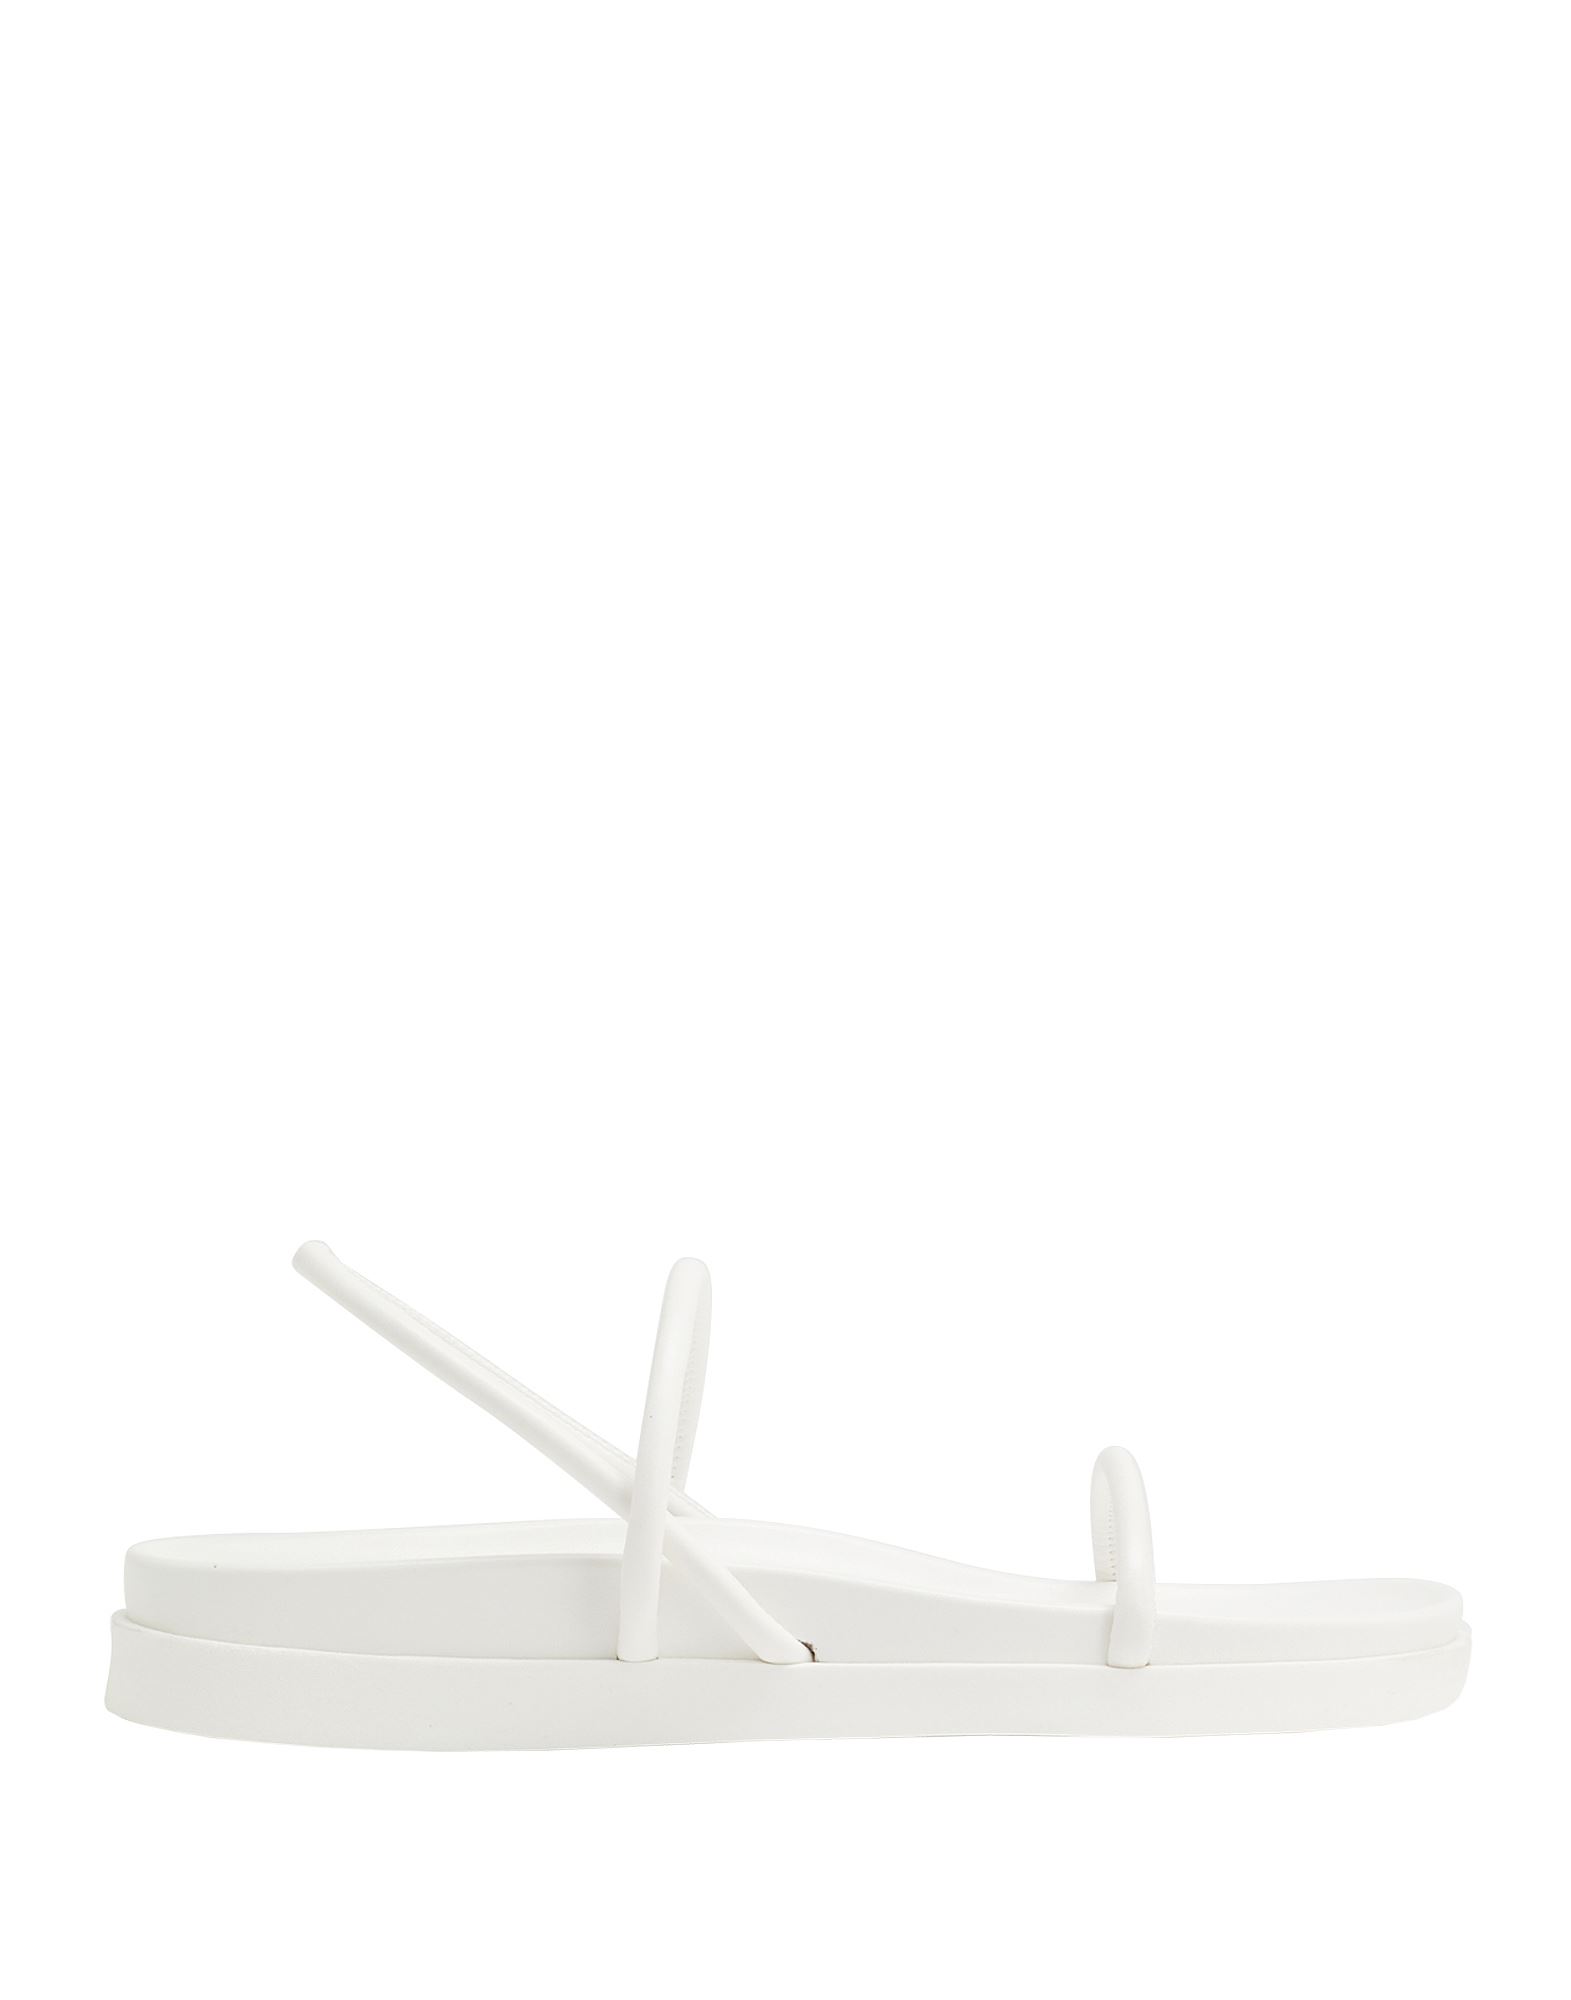 8 By Yoox Sandals In White